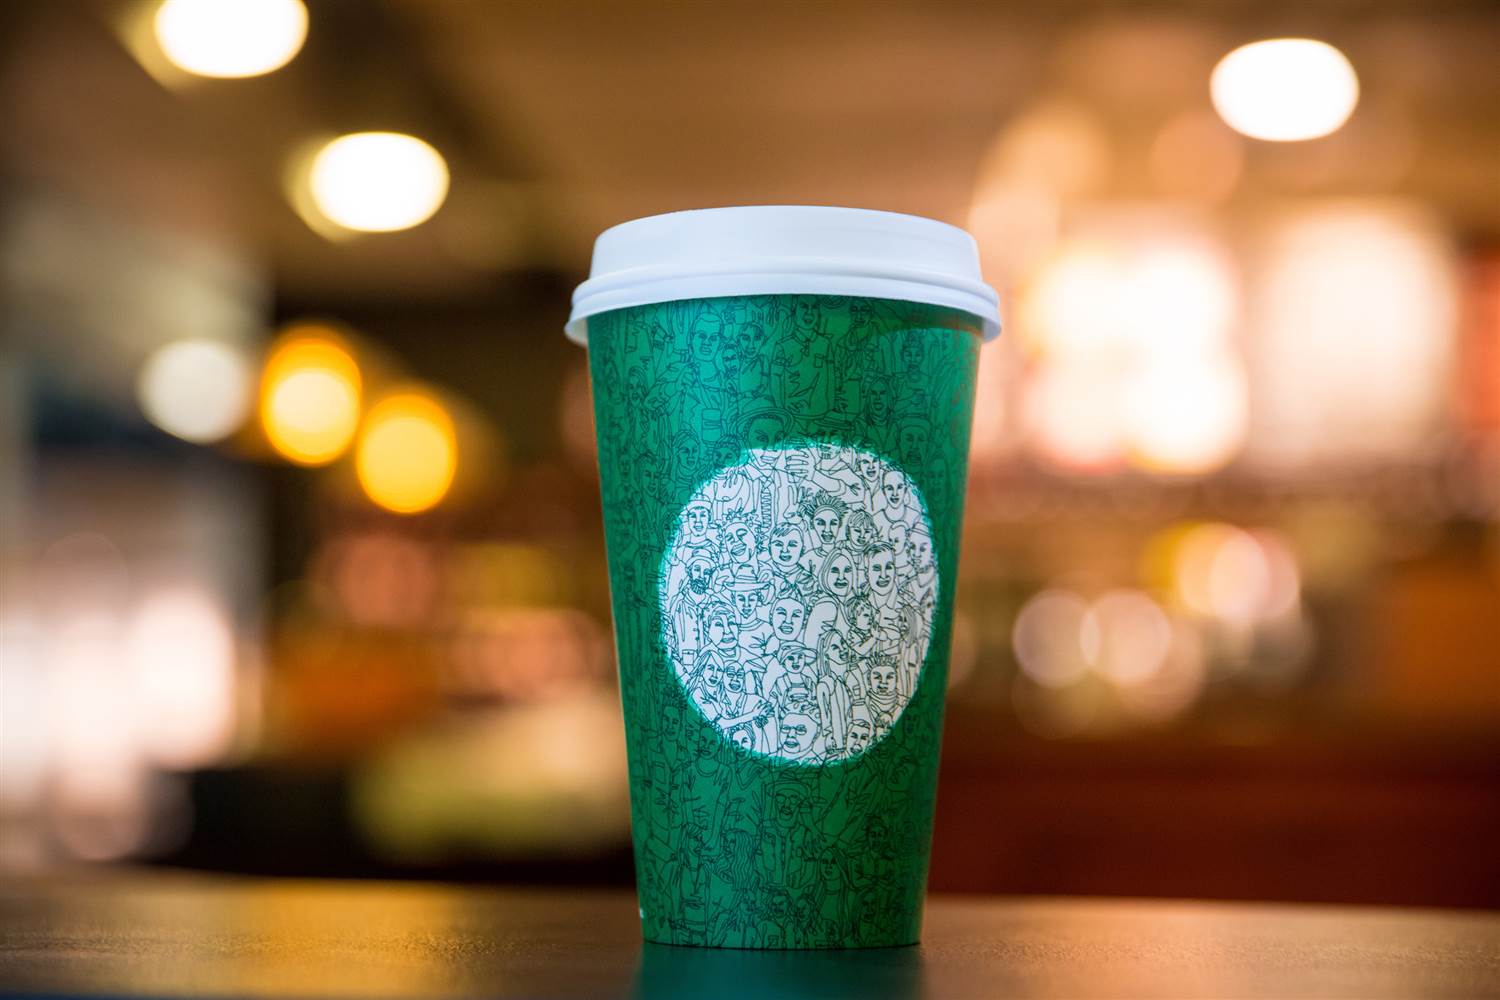 People Are Upset with Starbucks' Cup...AGAIN